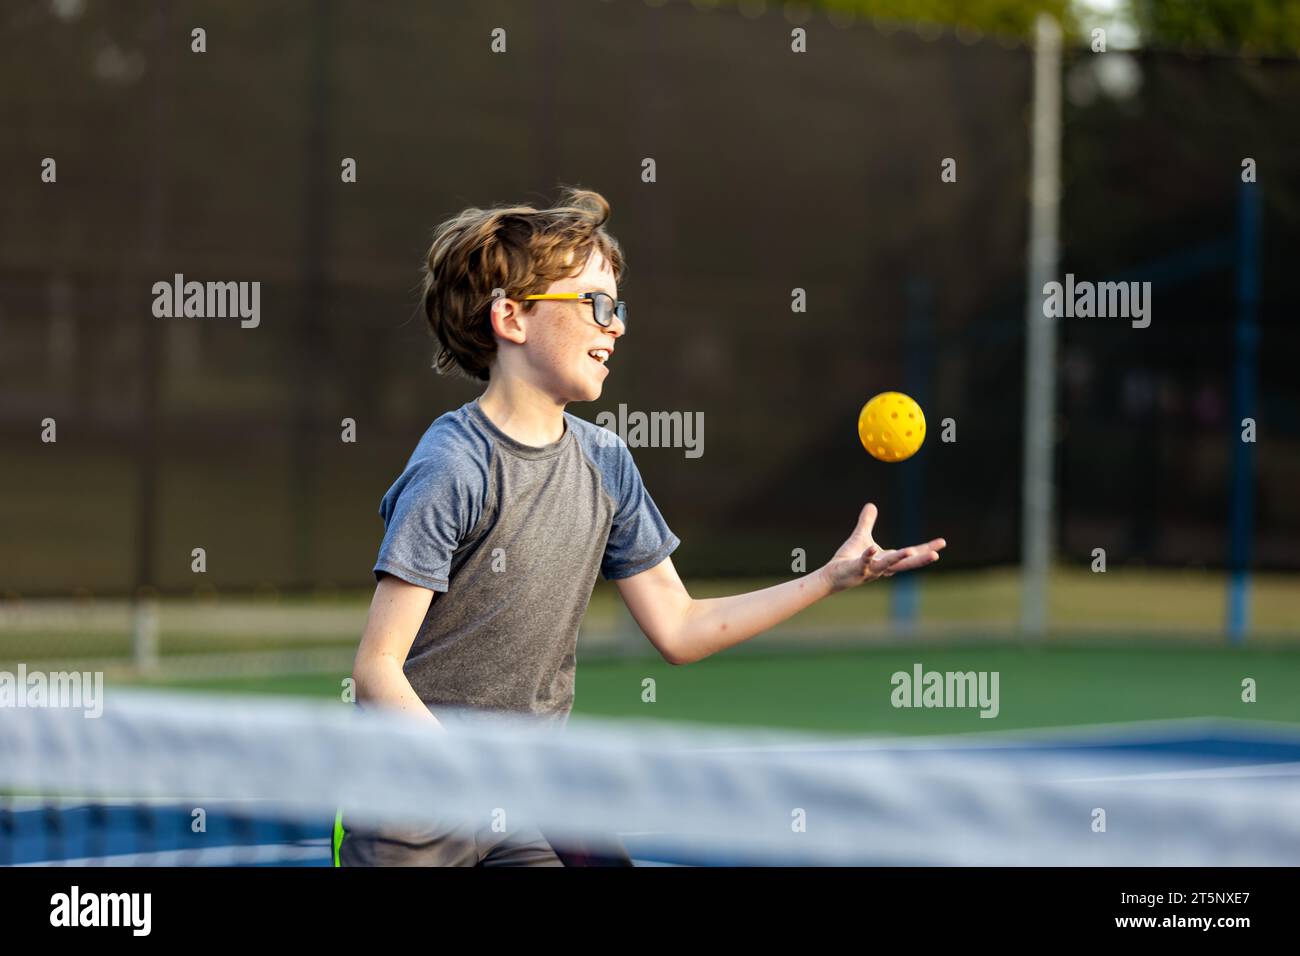 Boy on court playing pickleball Stock Photo